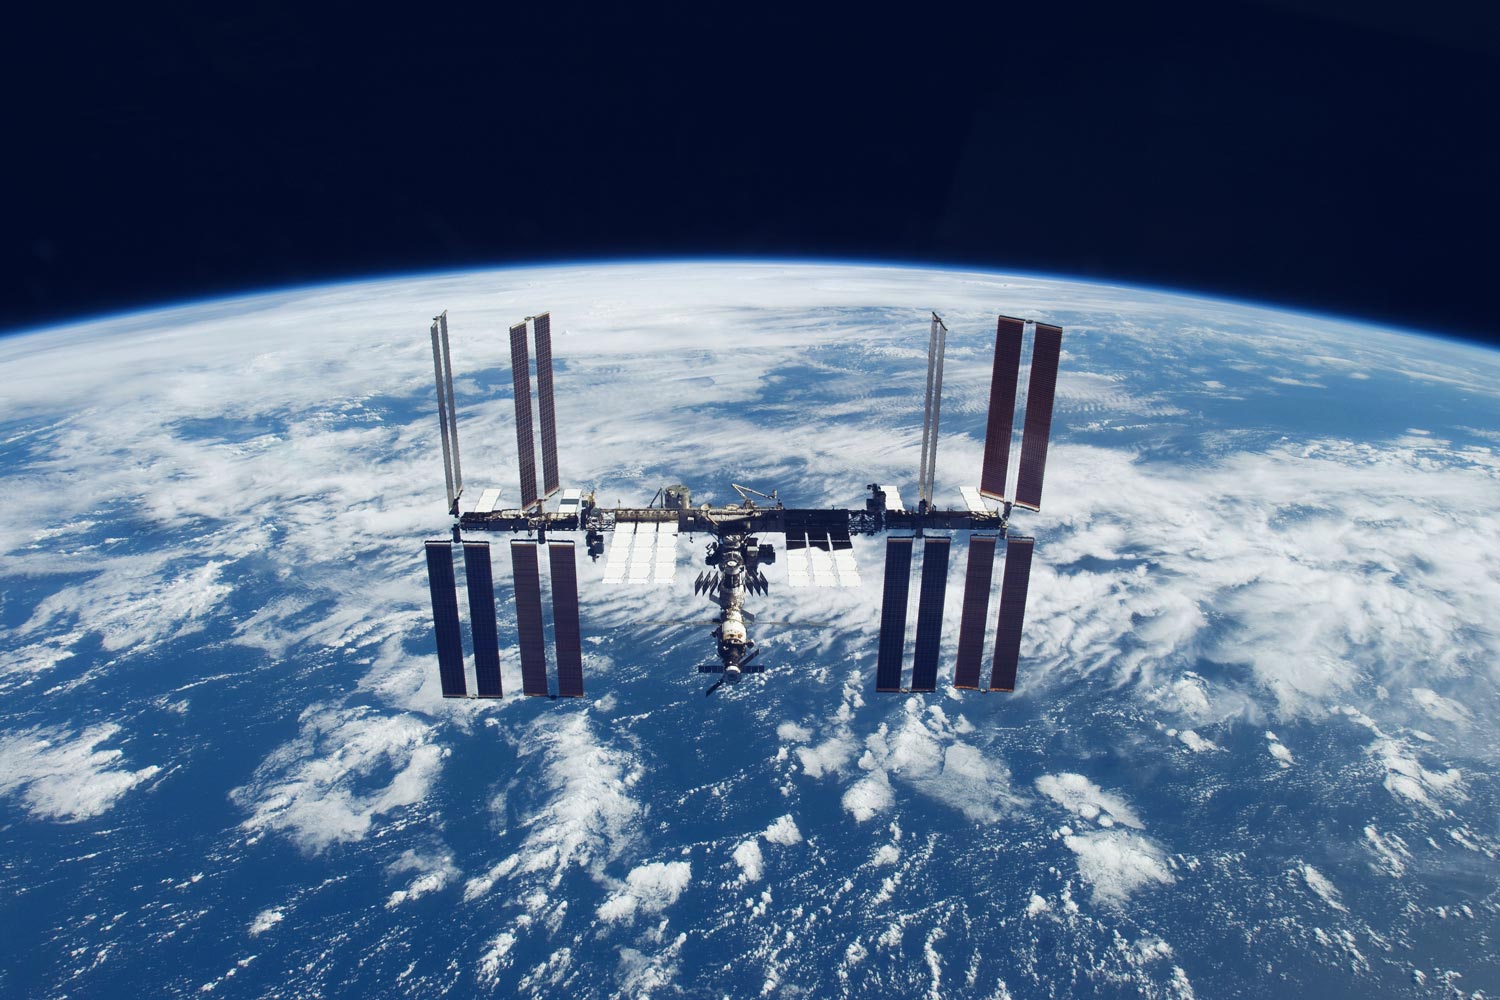 International Space Station with the cloudy earth below